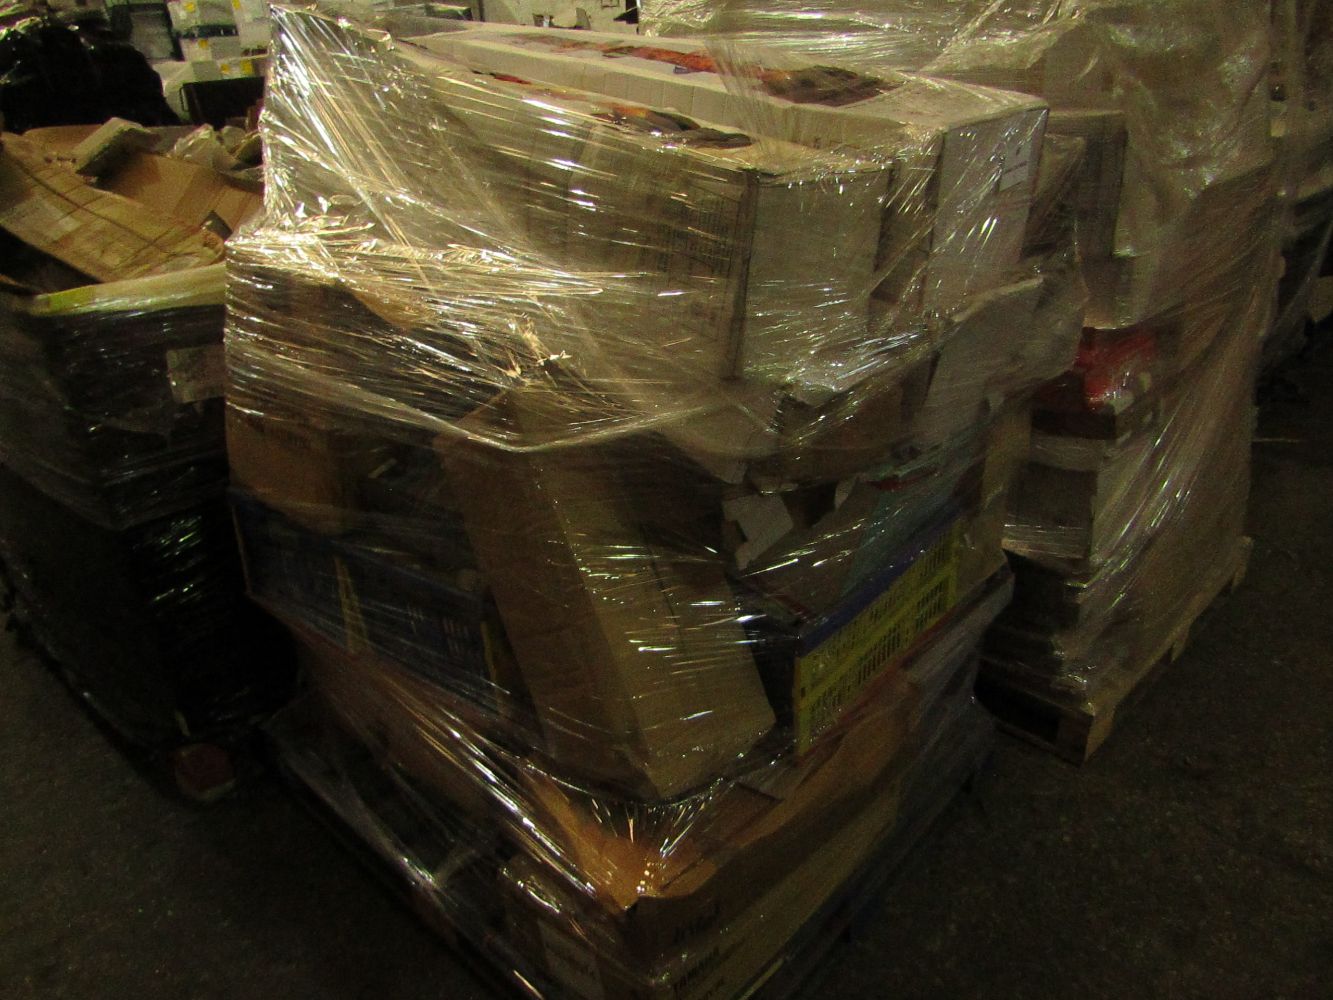 Pallets of returns, end of line and damaged stock